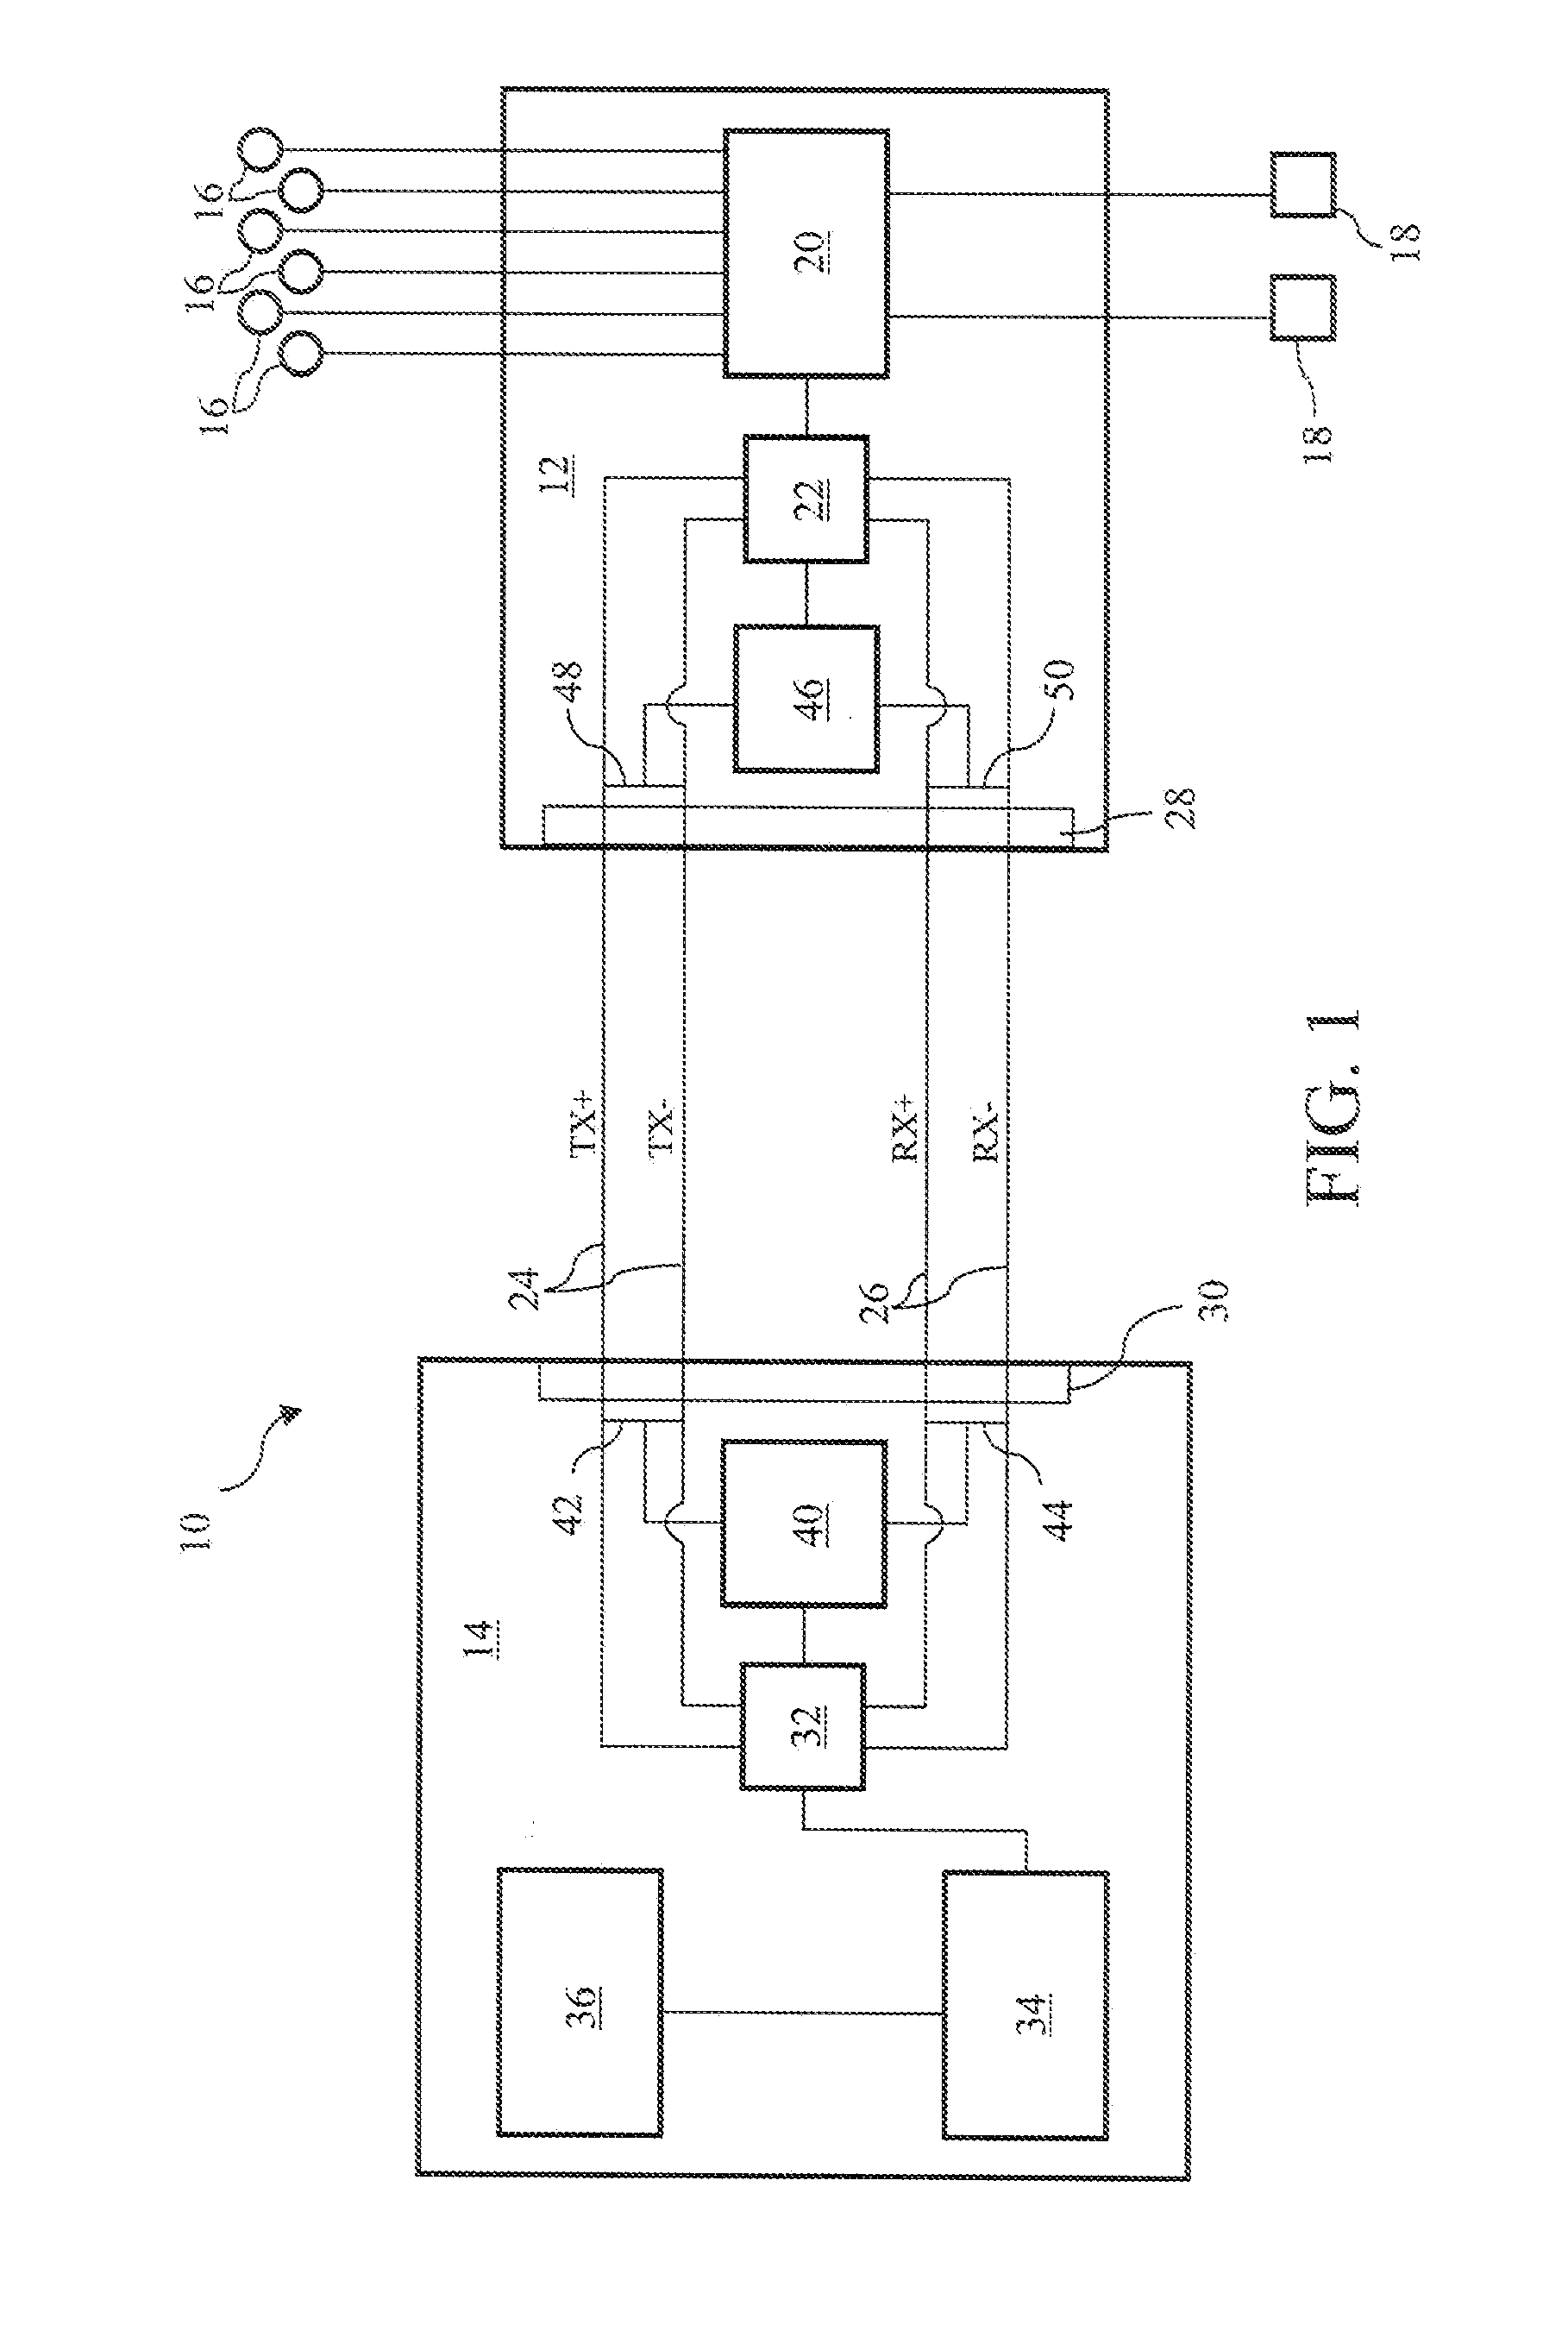 Motion control system with digital processing link